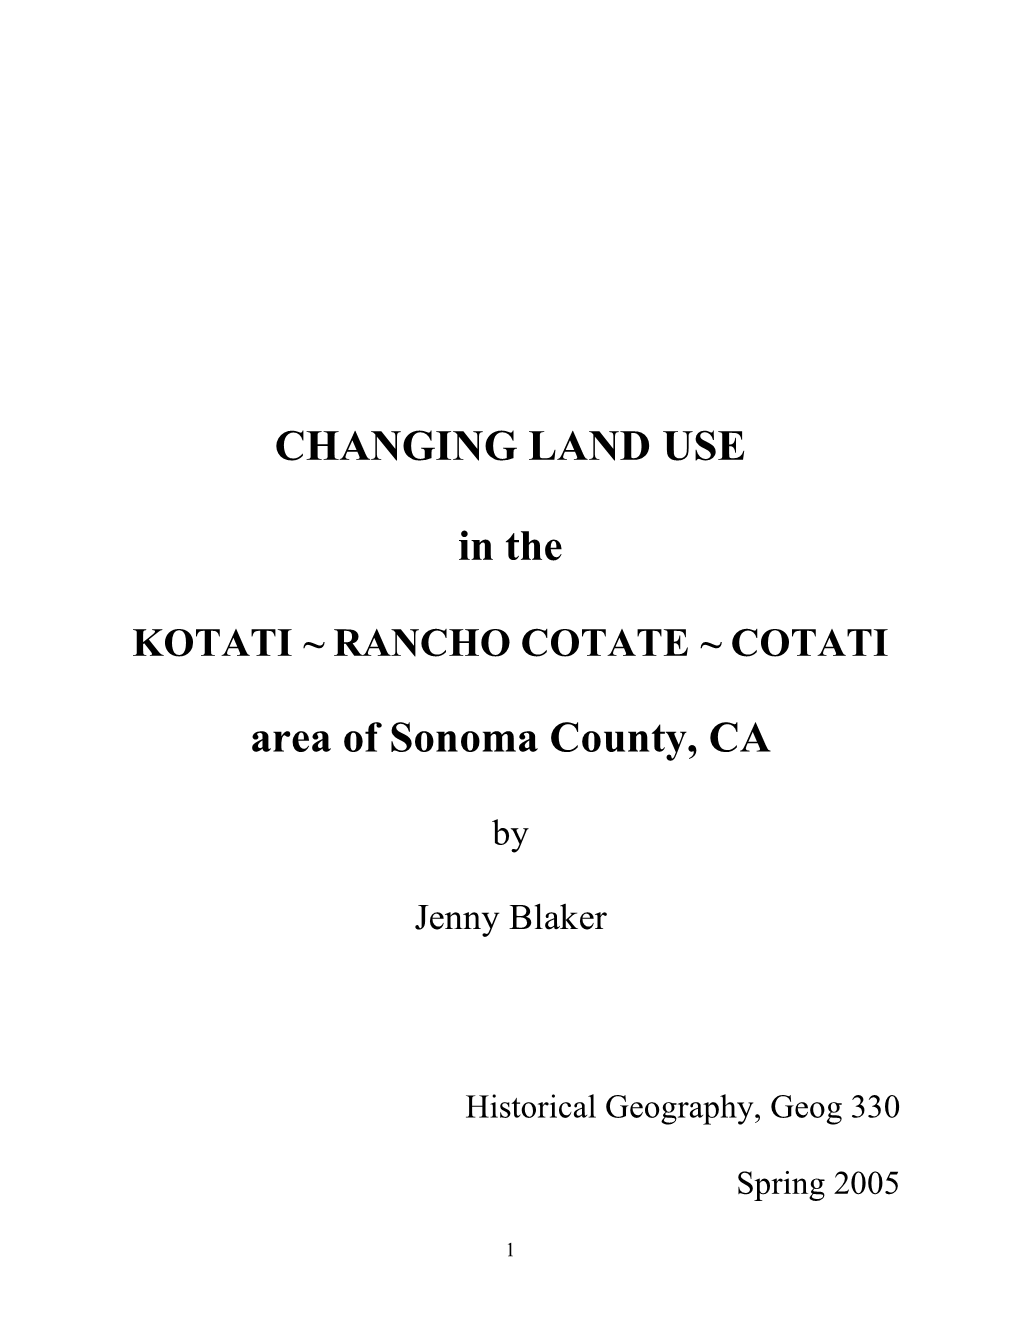 CHANGING LAND USE in the Area of Sonoma County, CA